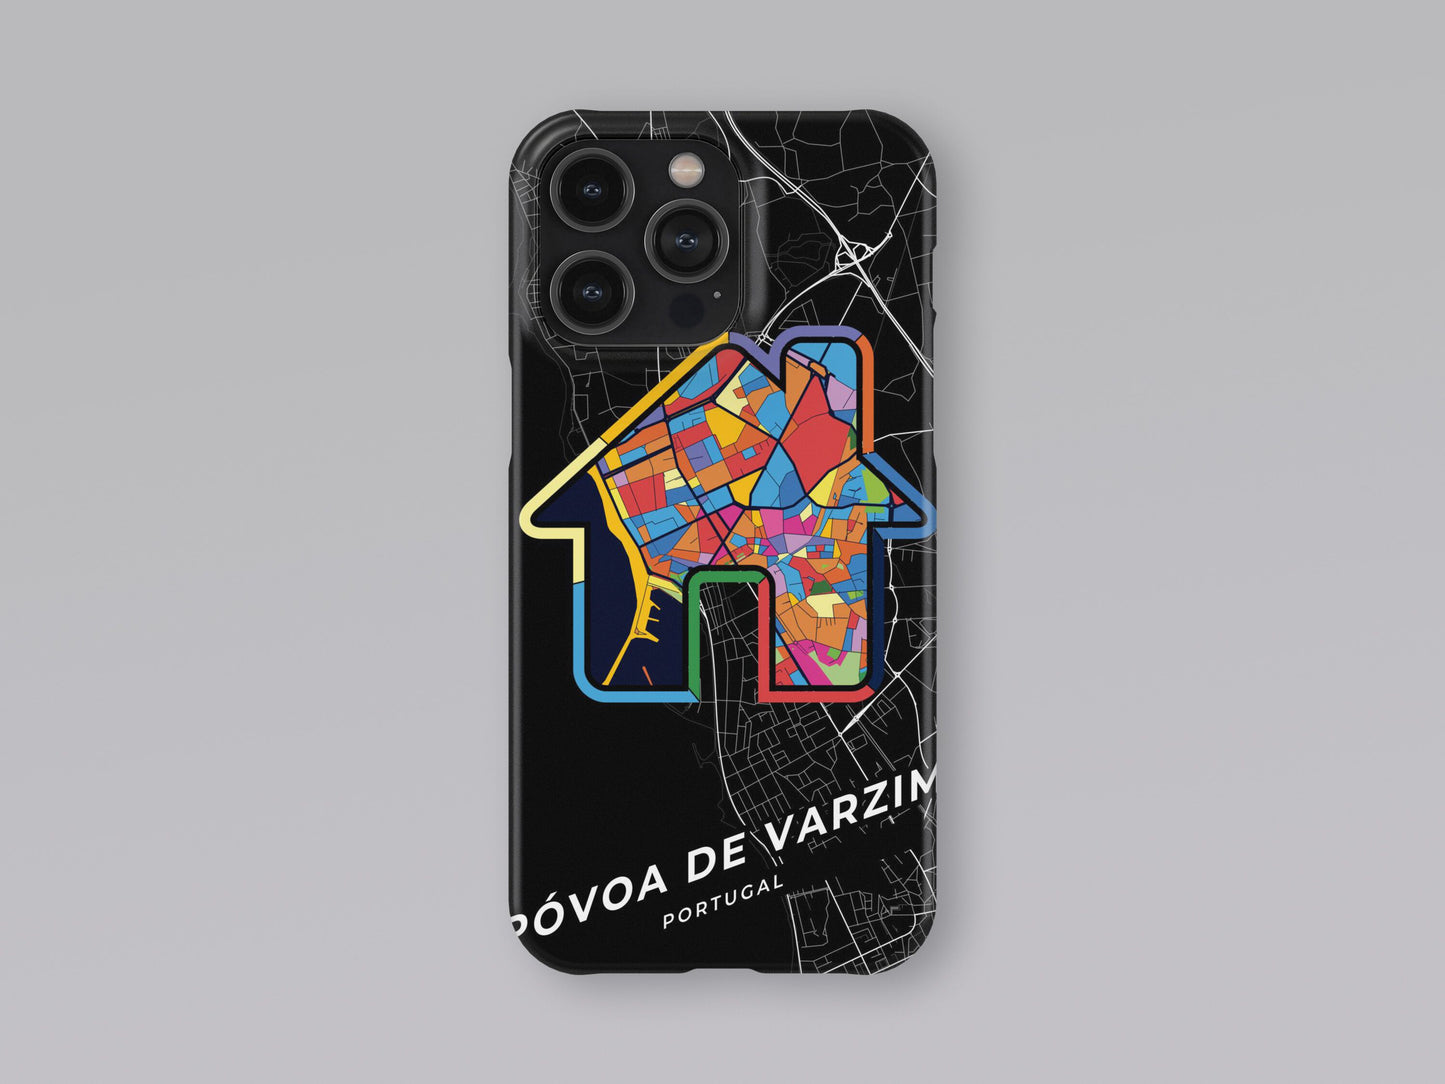 Póvoa De Varzim Portugal slim phone case with colorful icon. Birthday, wedding or housewarming gift. Couple match cases. 3